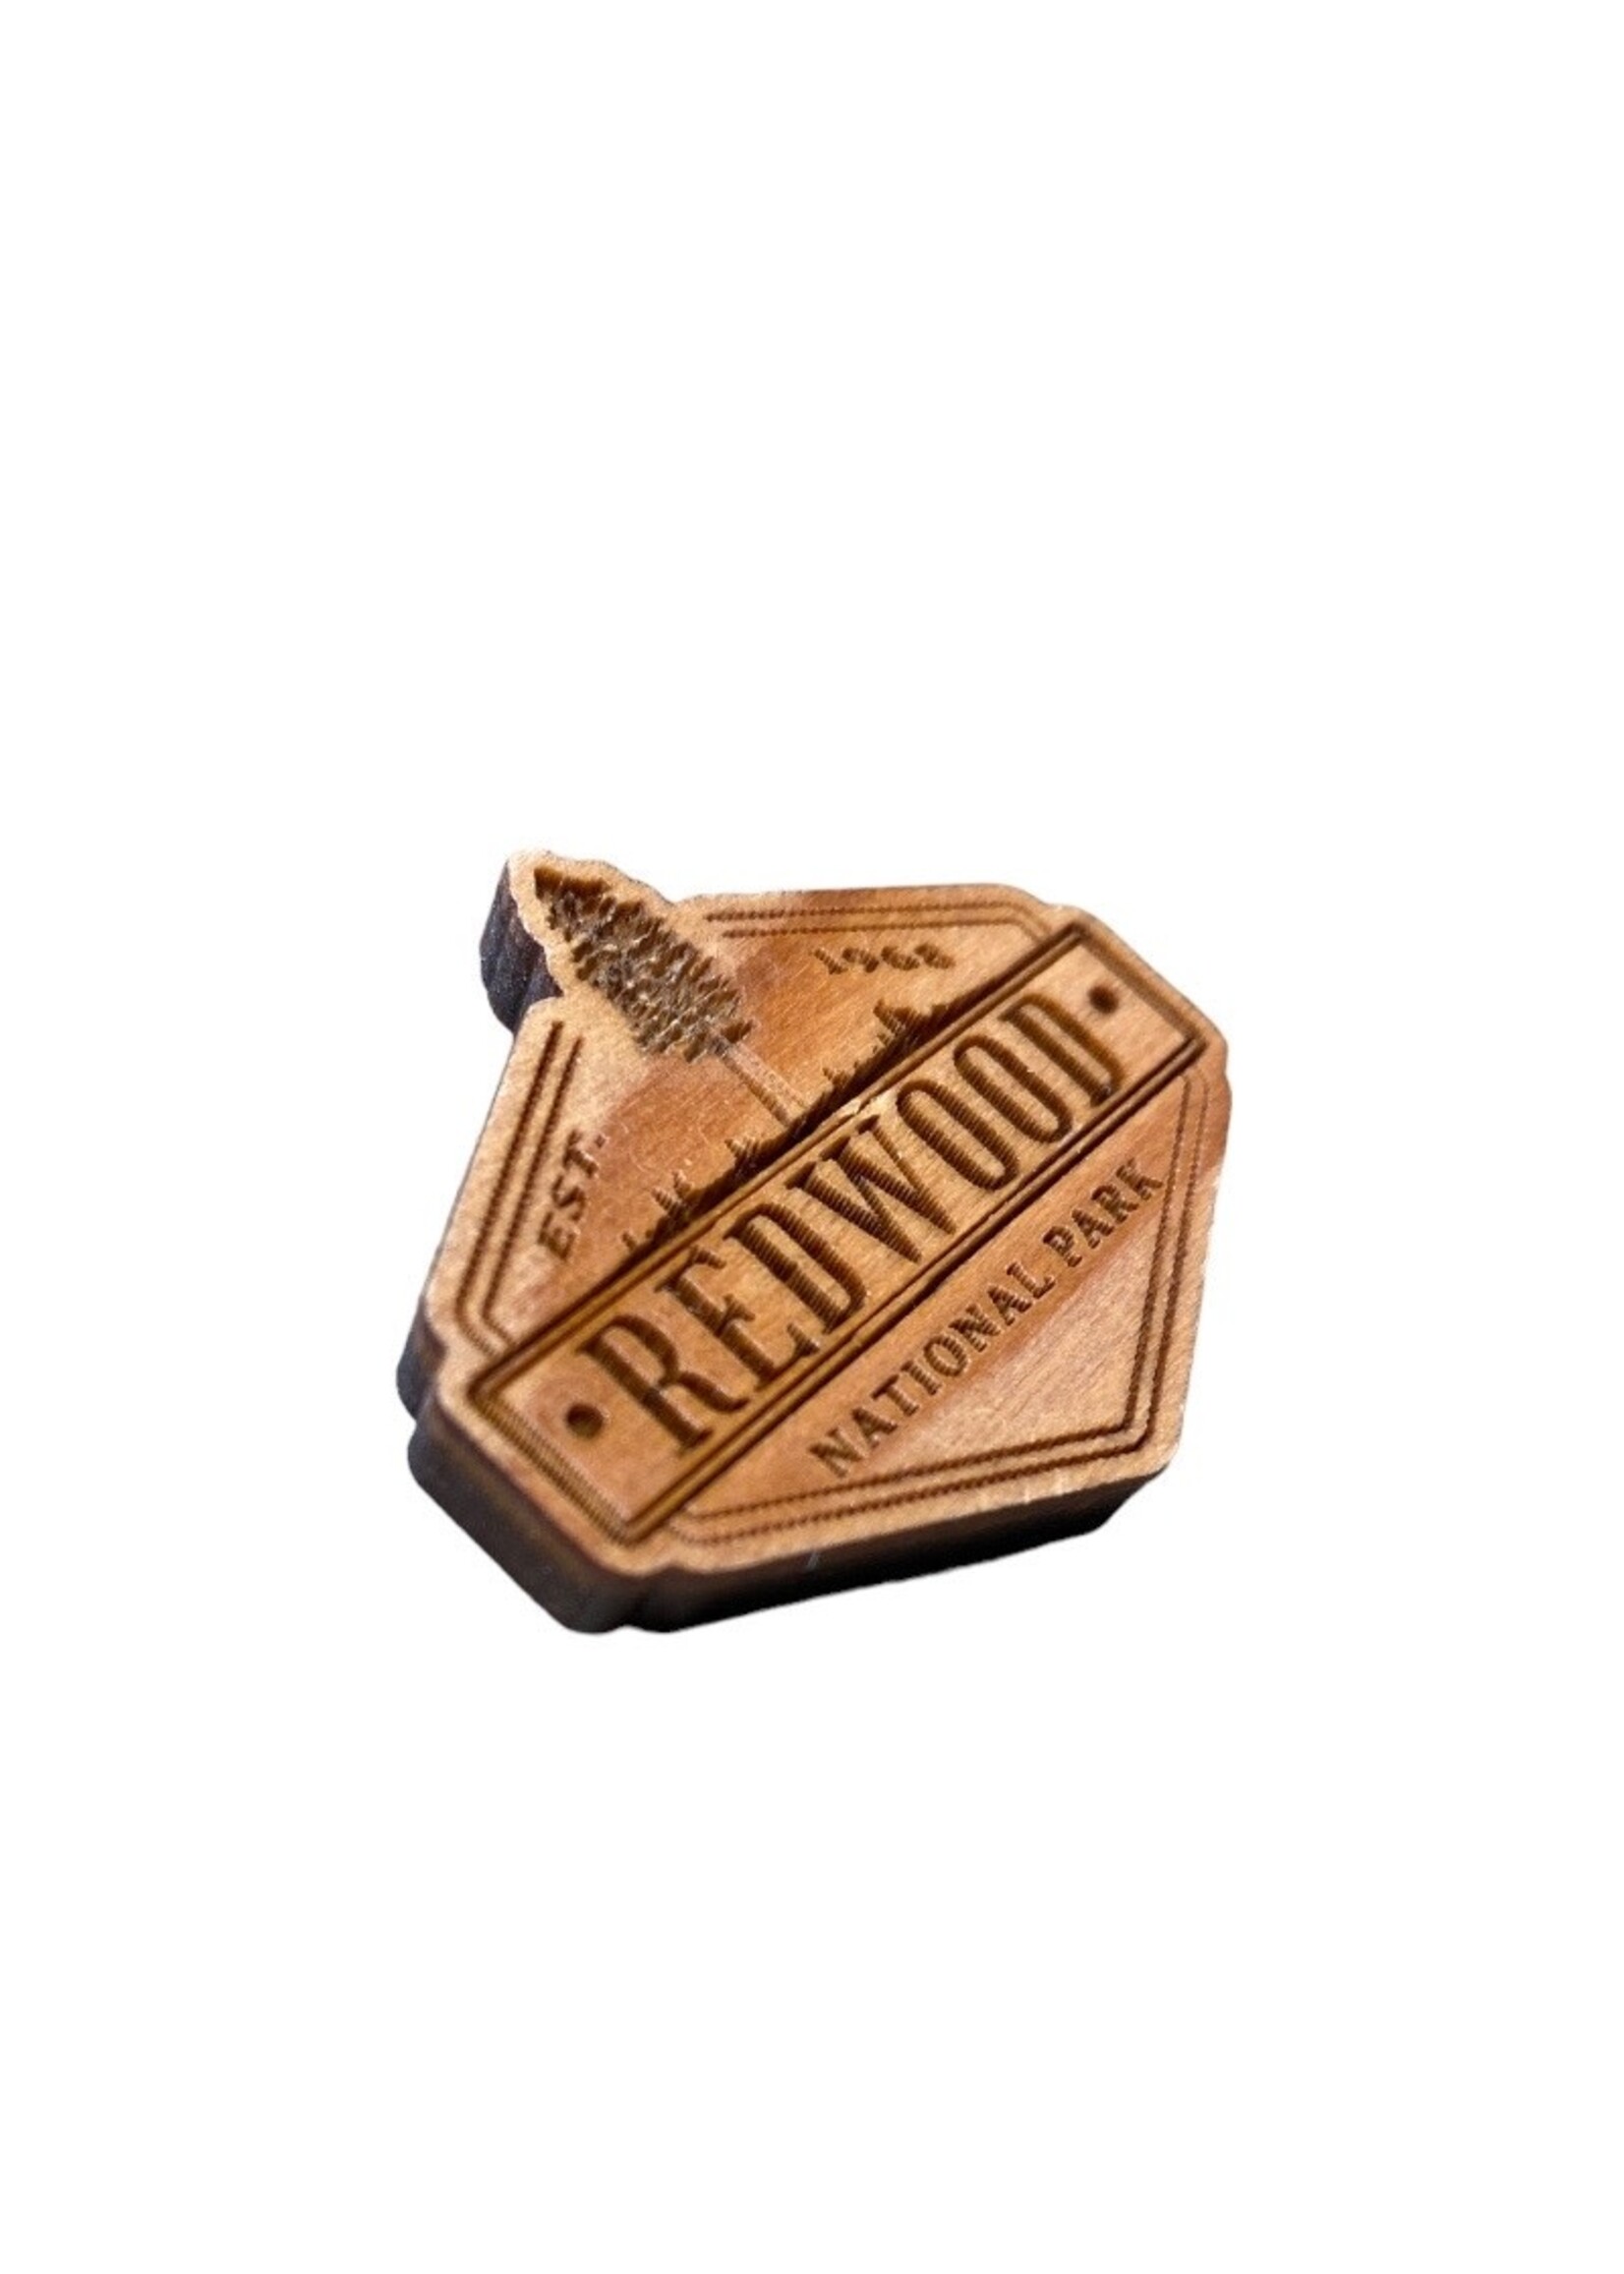 Collectible Pin (Redwood) National Park